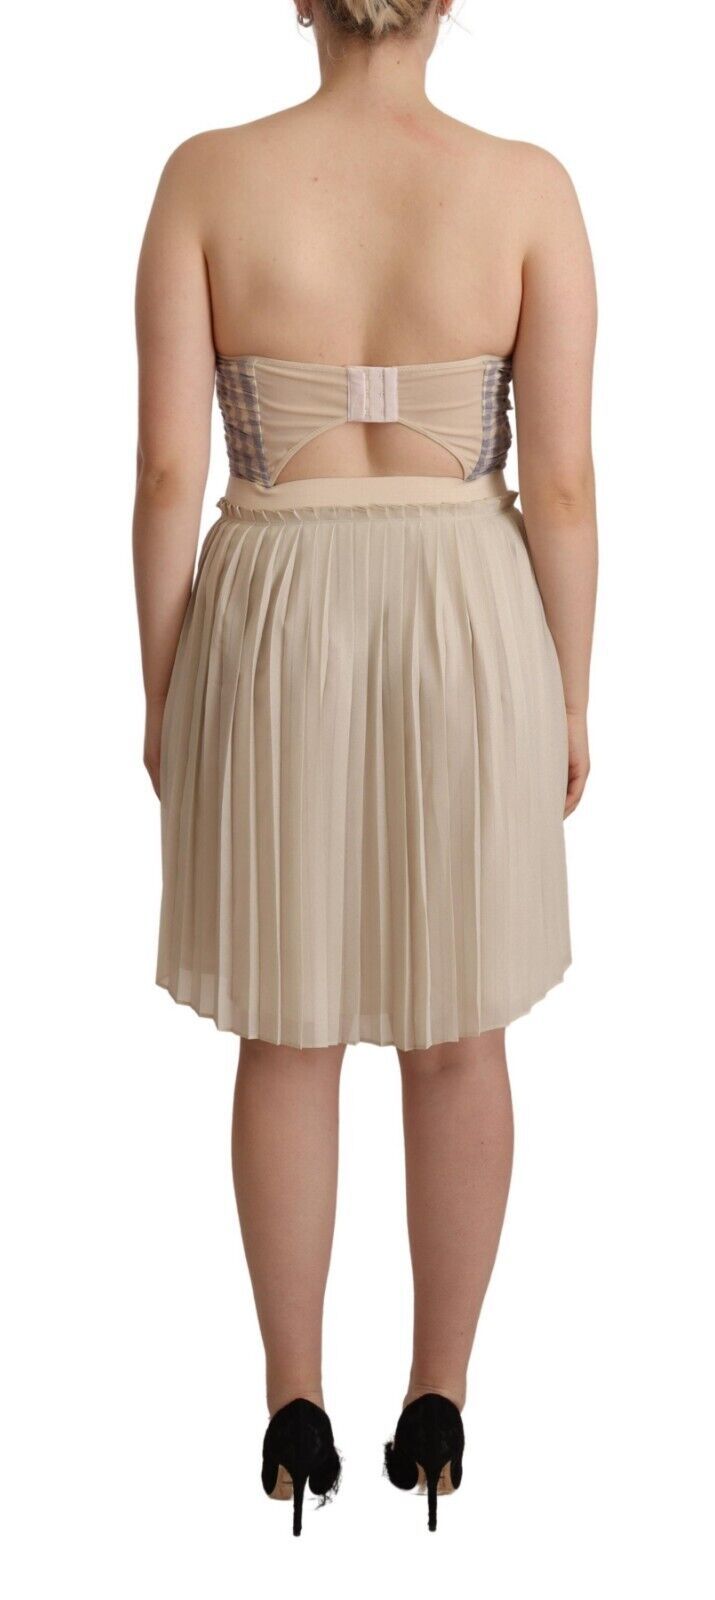 Guess Chic Beige Strapless A-Line Dress